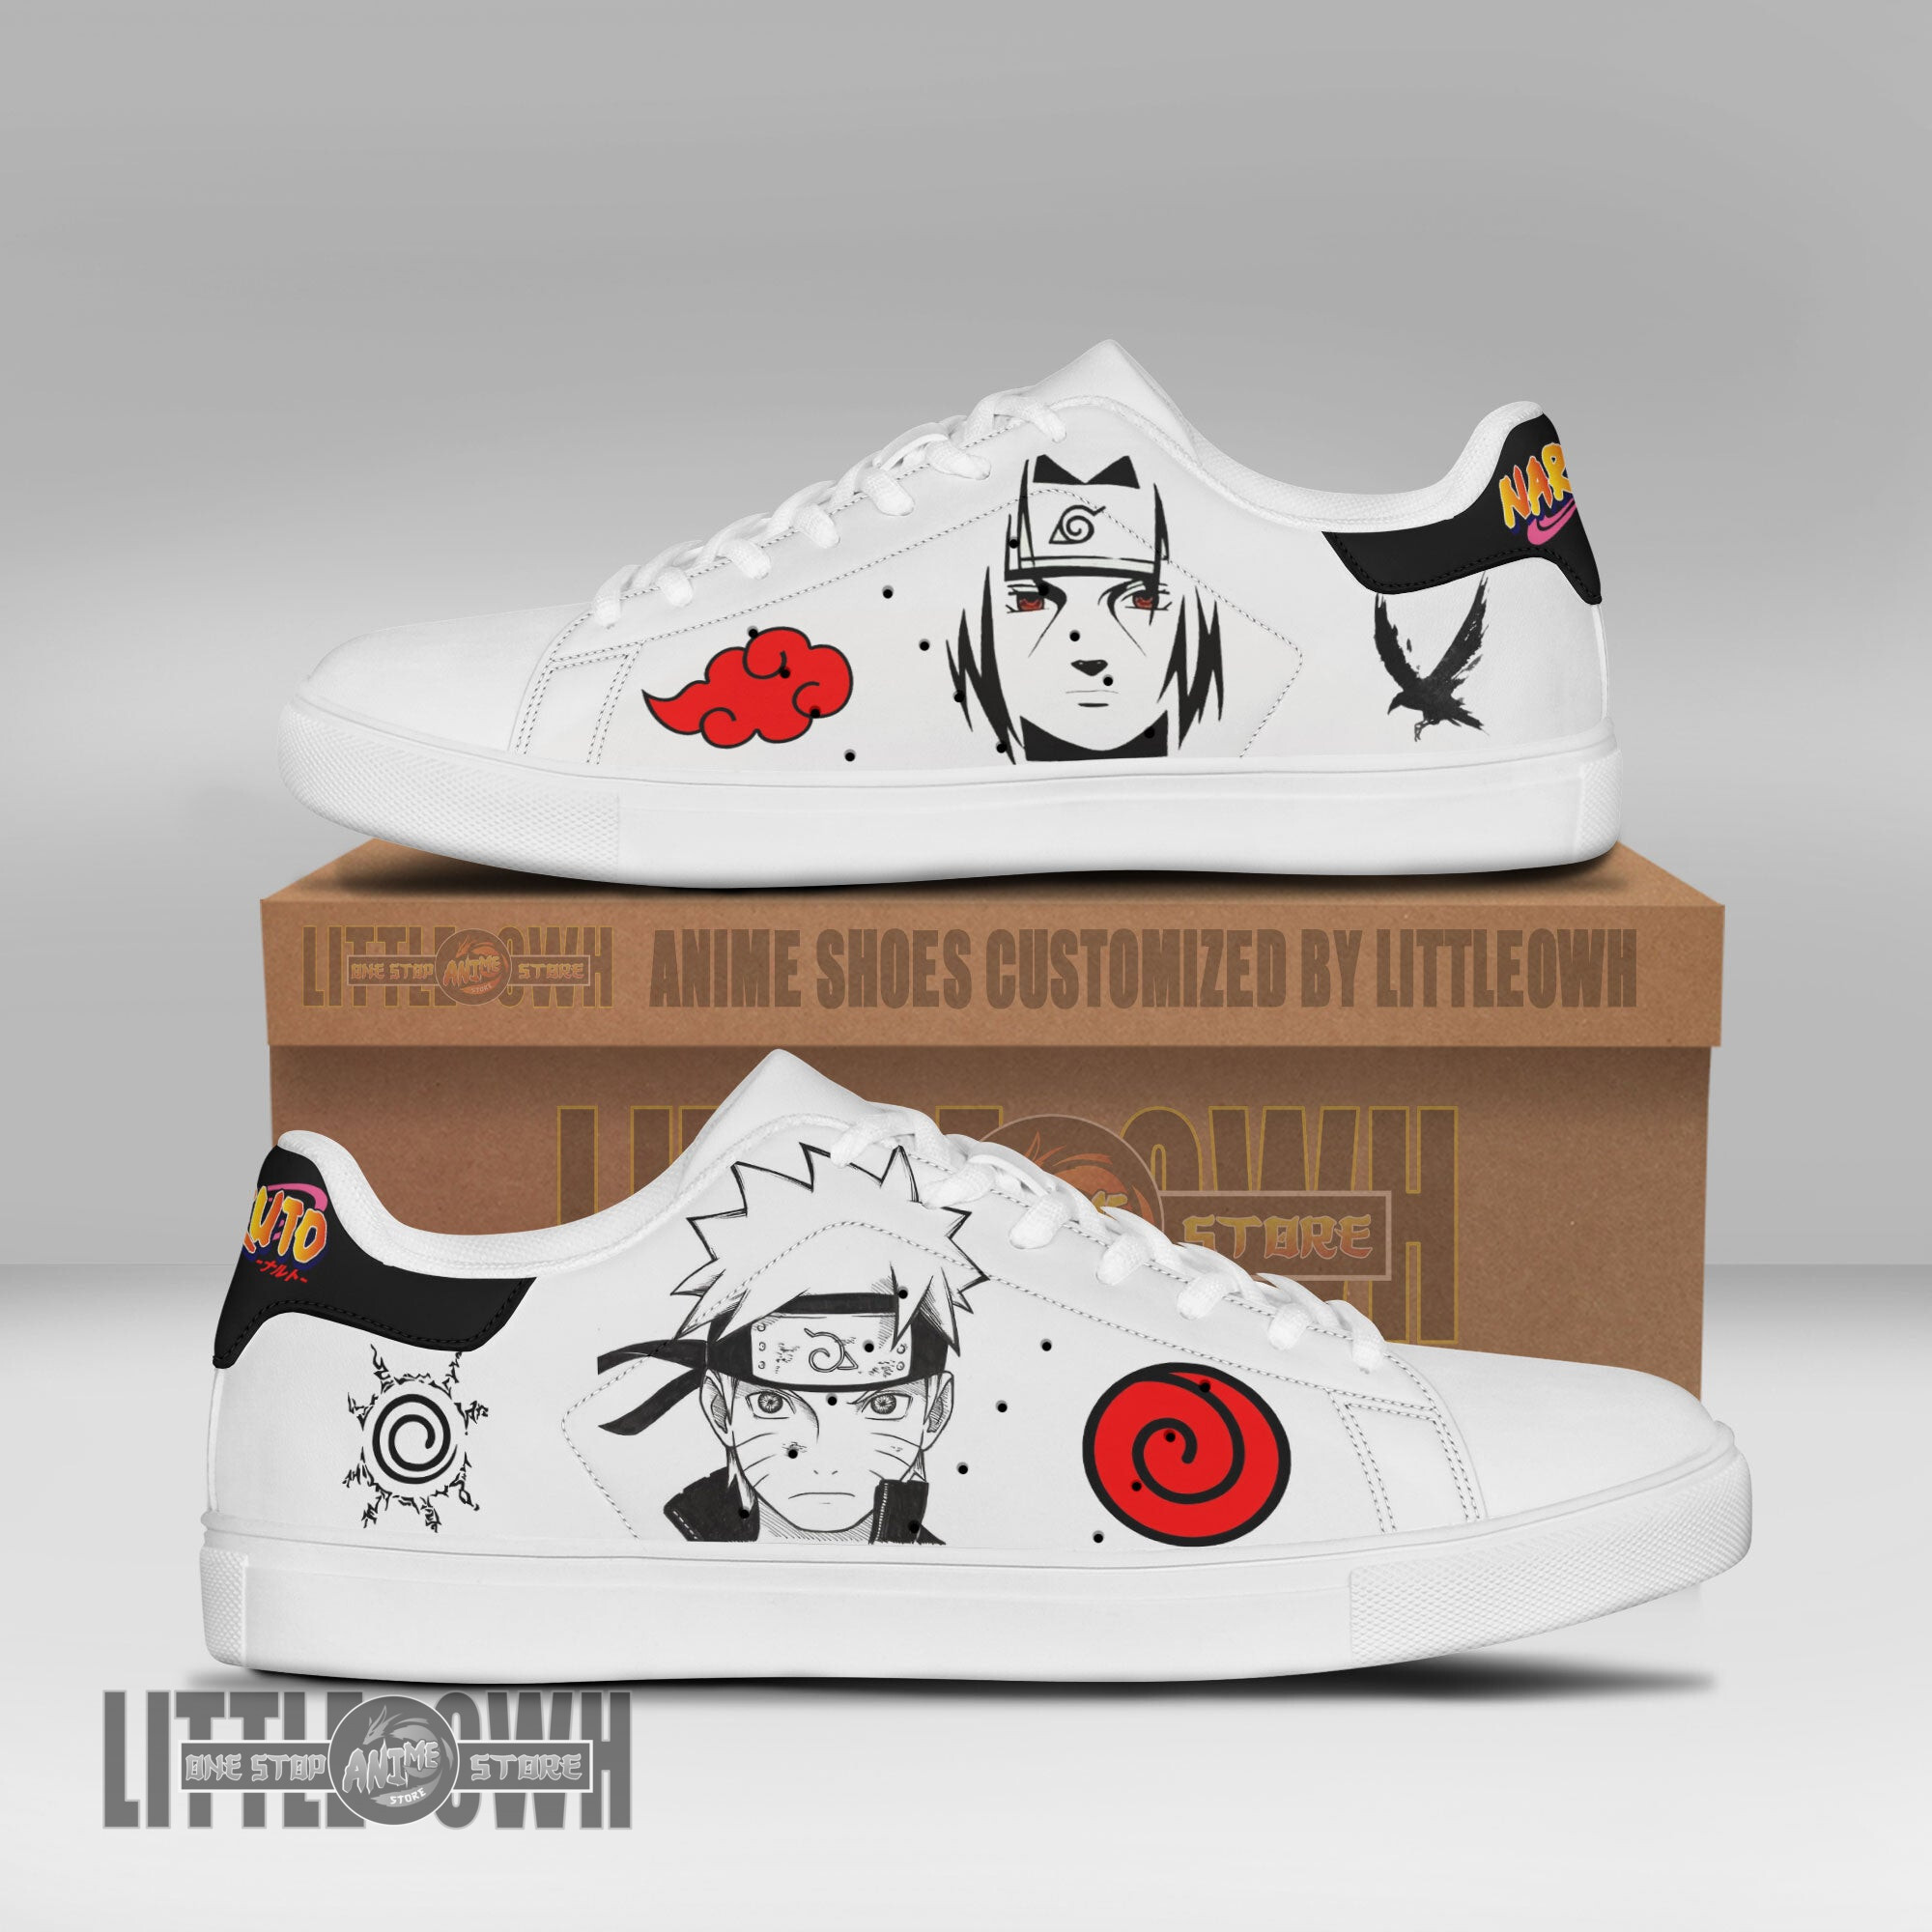 Naruto Sneakers | Isalnd of Anime – Island of Anime